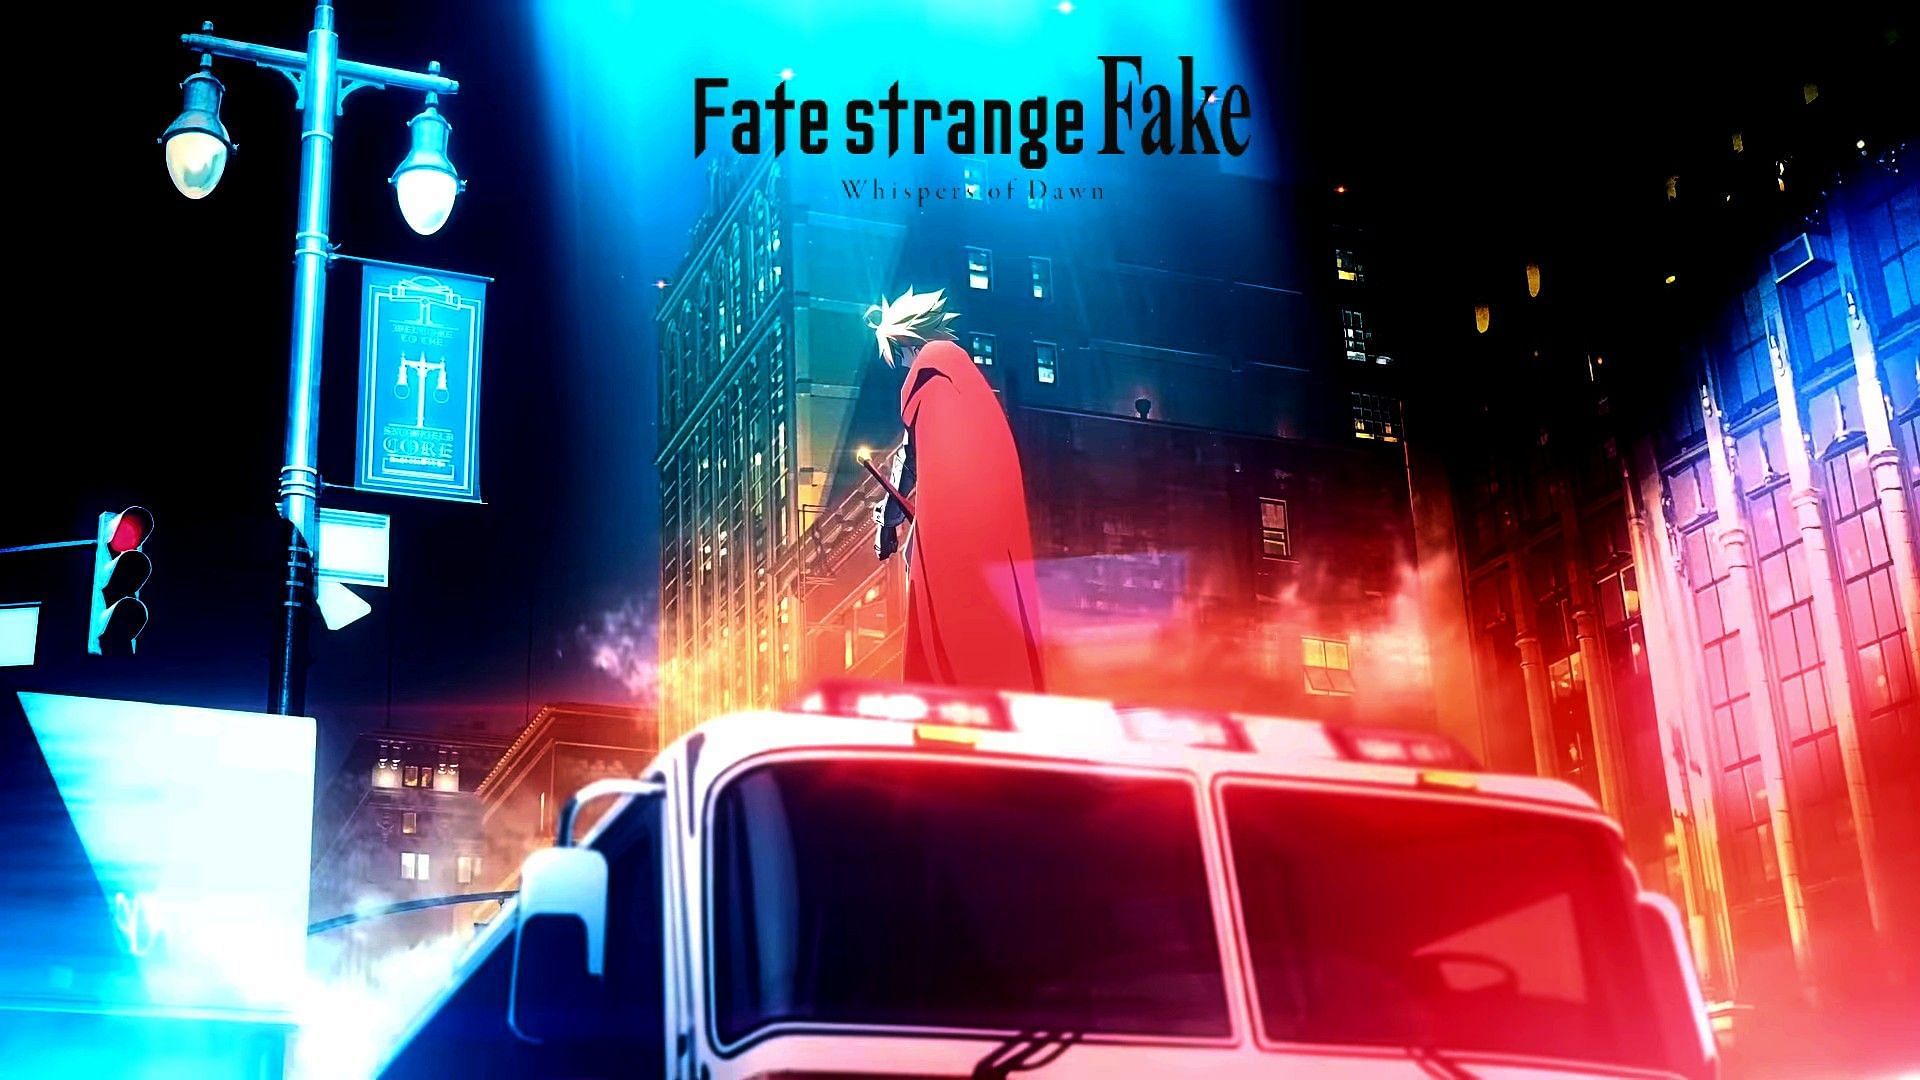 Fate/strange Fake - Whispers of Dawn spinoff announced to receive a TV anime  special at Aniplex Online Fest 2022